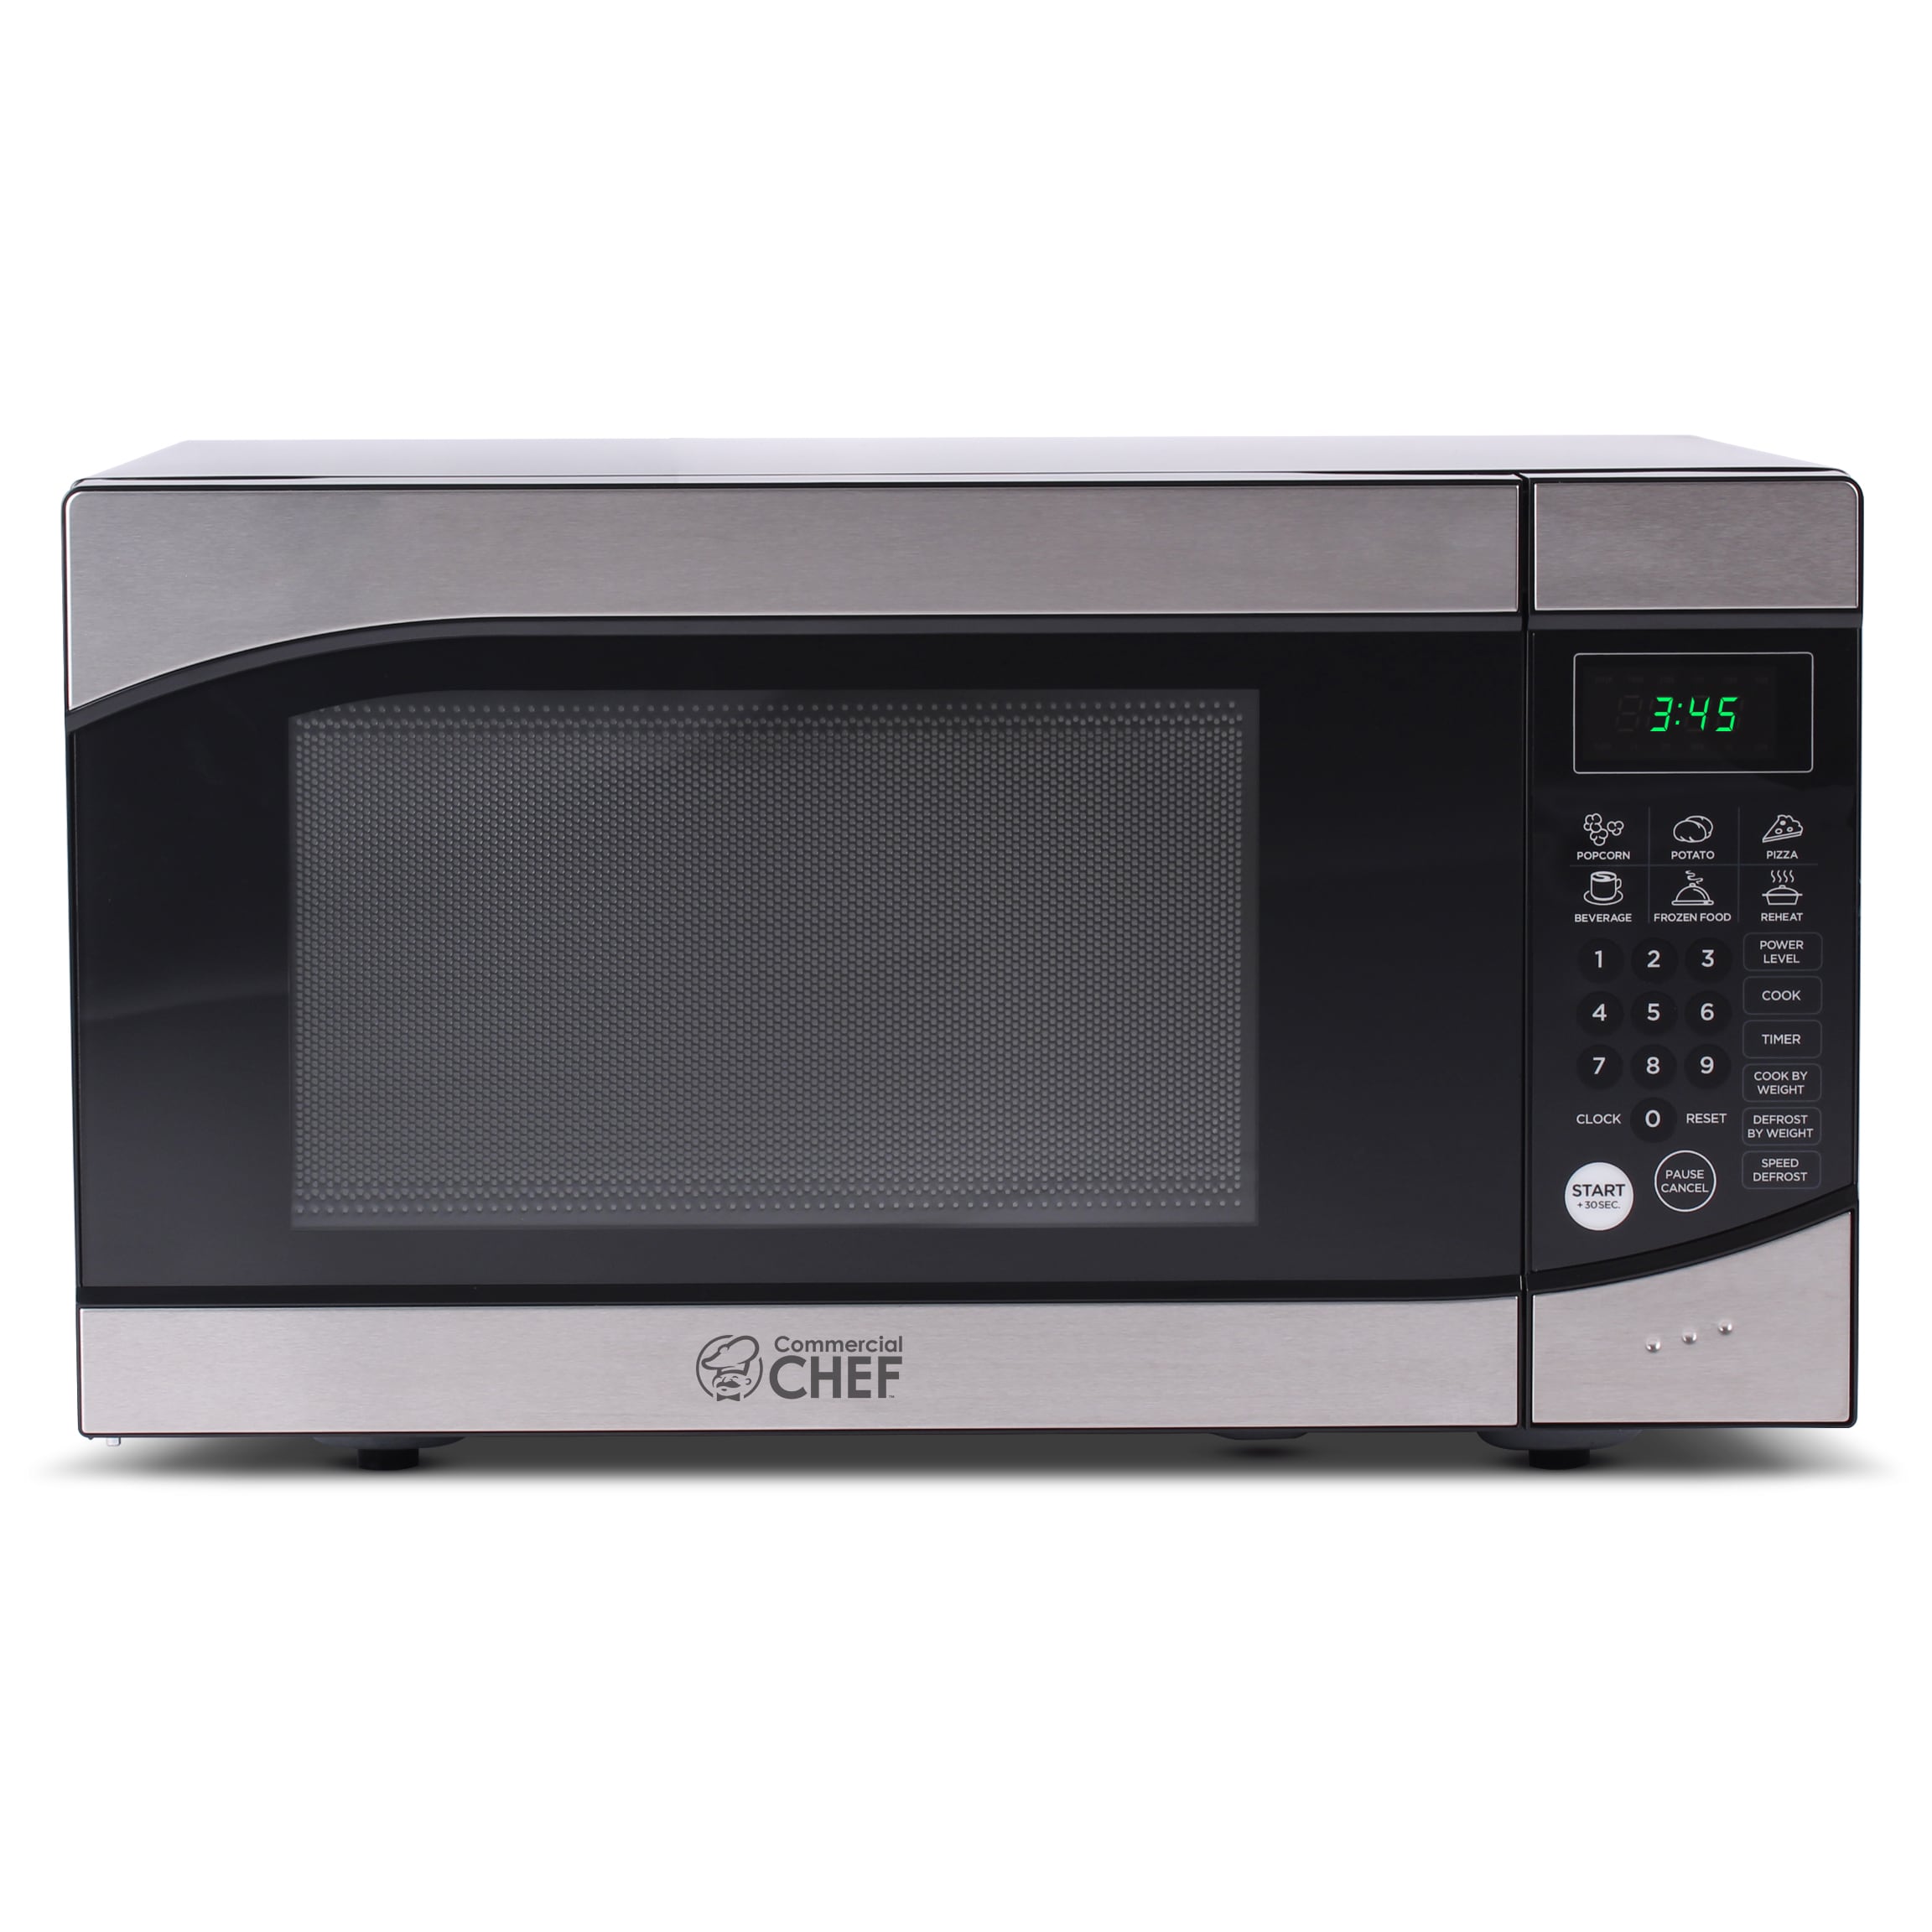 Commercial CHEF Countertop Microwave Oven 900 Watt, 0.9 cu. ft., Stainless  Steel Front, Black Cabinet, Small, Trim, CHM009 at Tractor Supply Co.